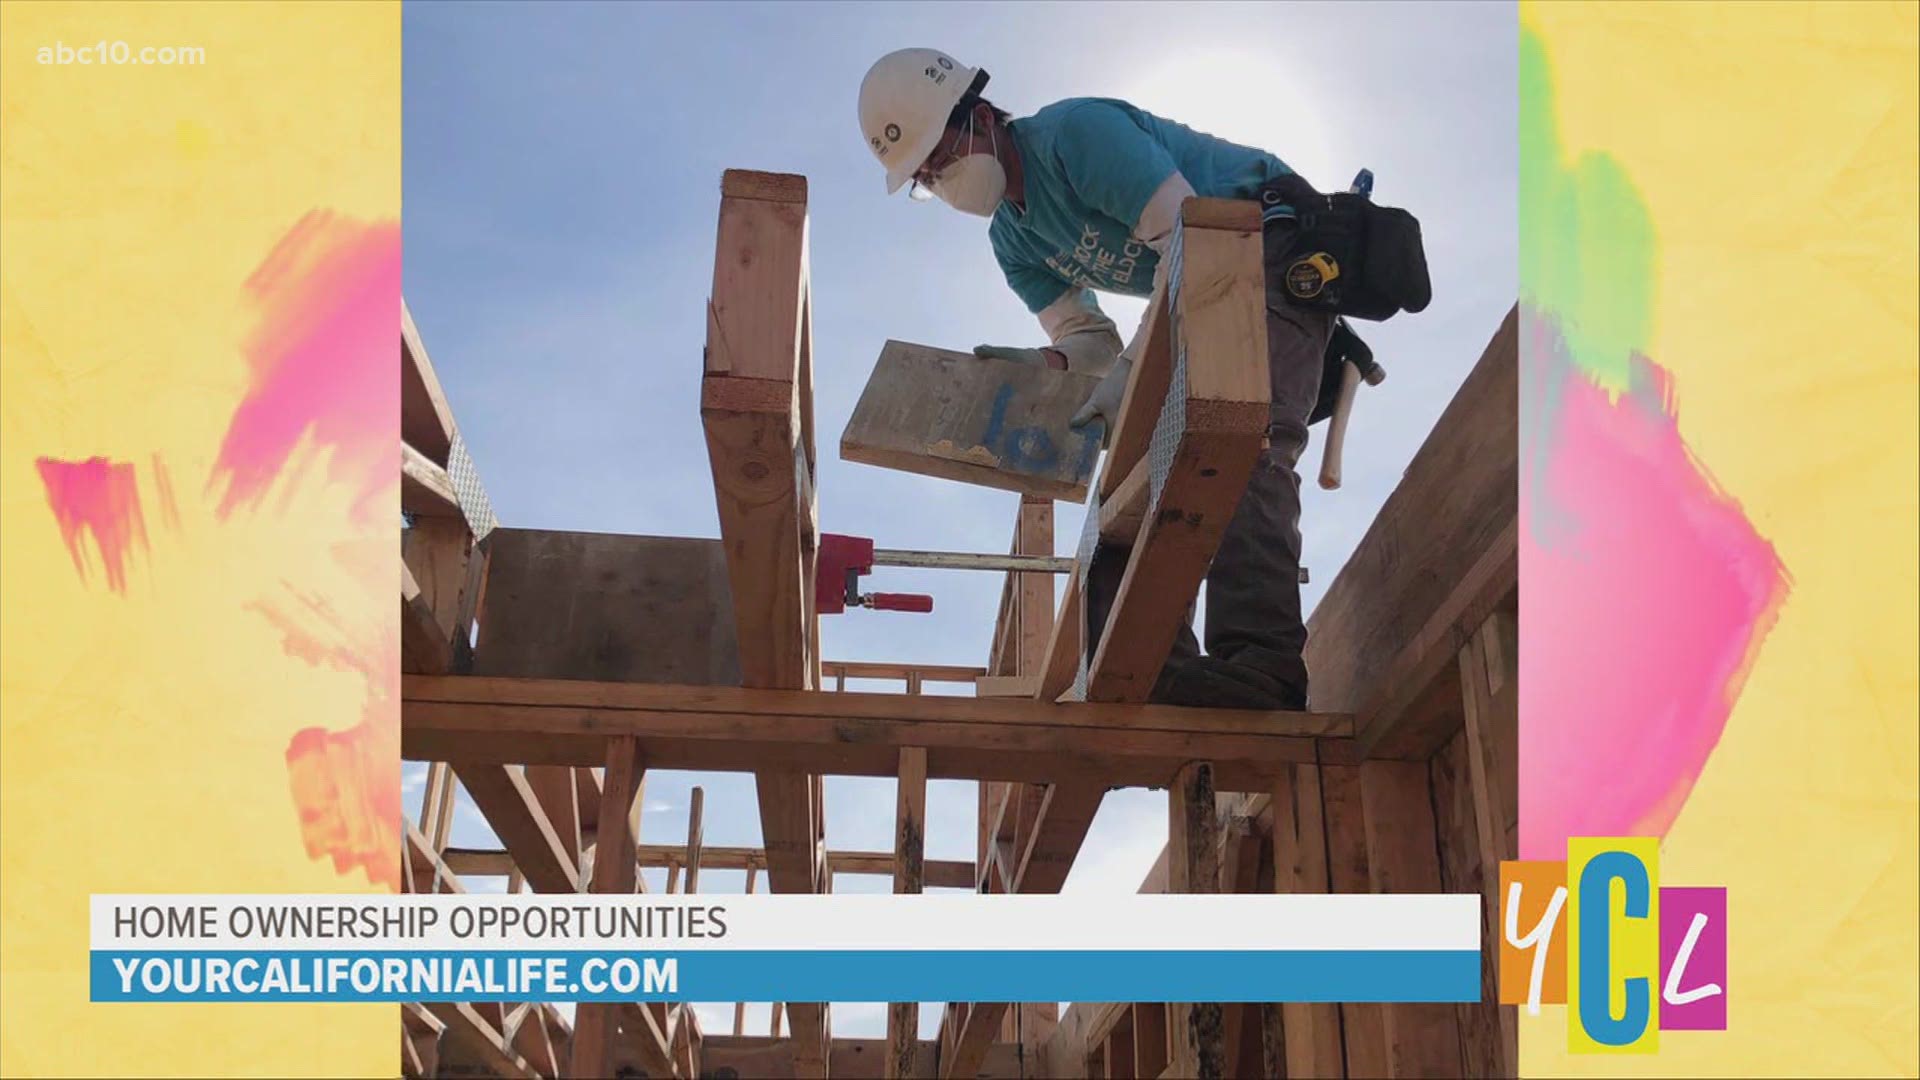 Habitat for Humanity of Greater Sacramento is taking applications with its program to provide affordable homes for lower-income families.